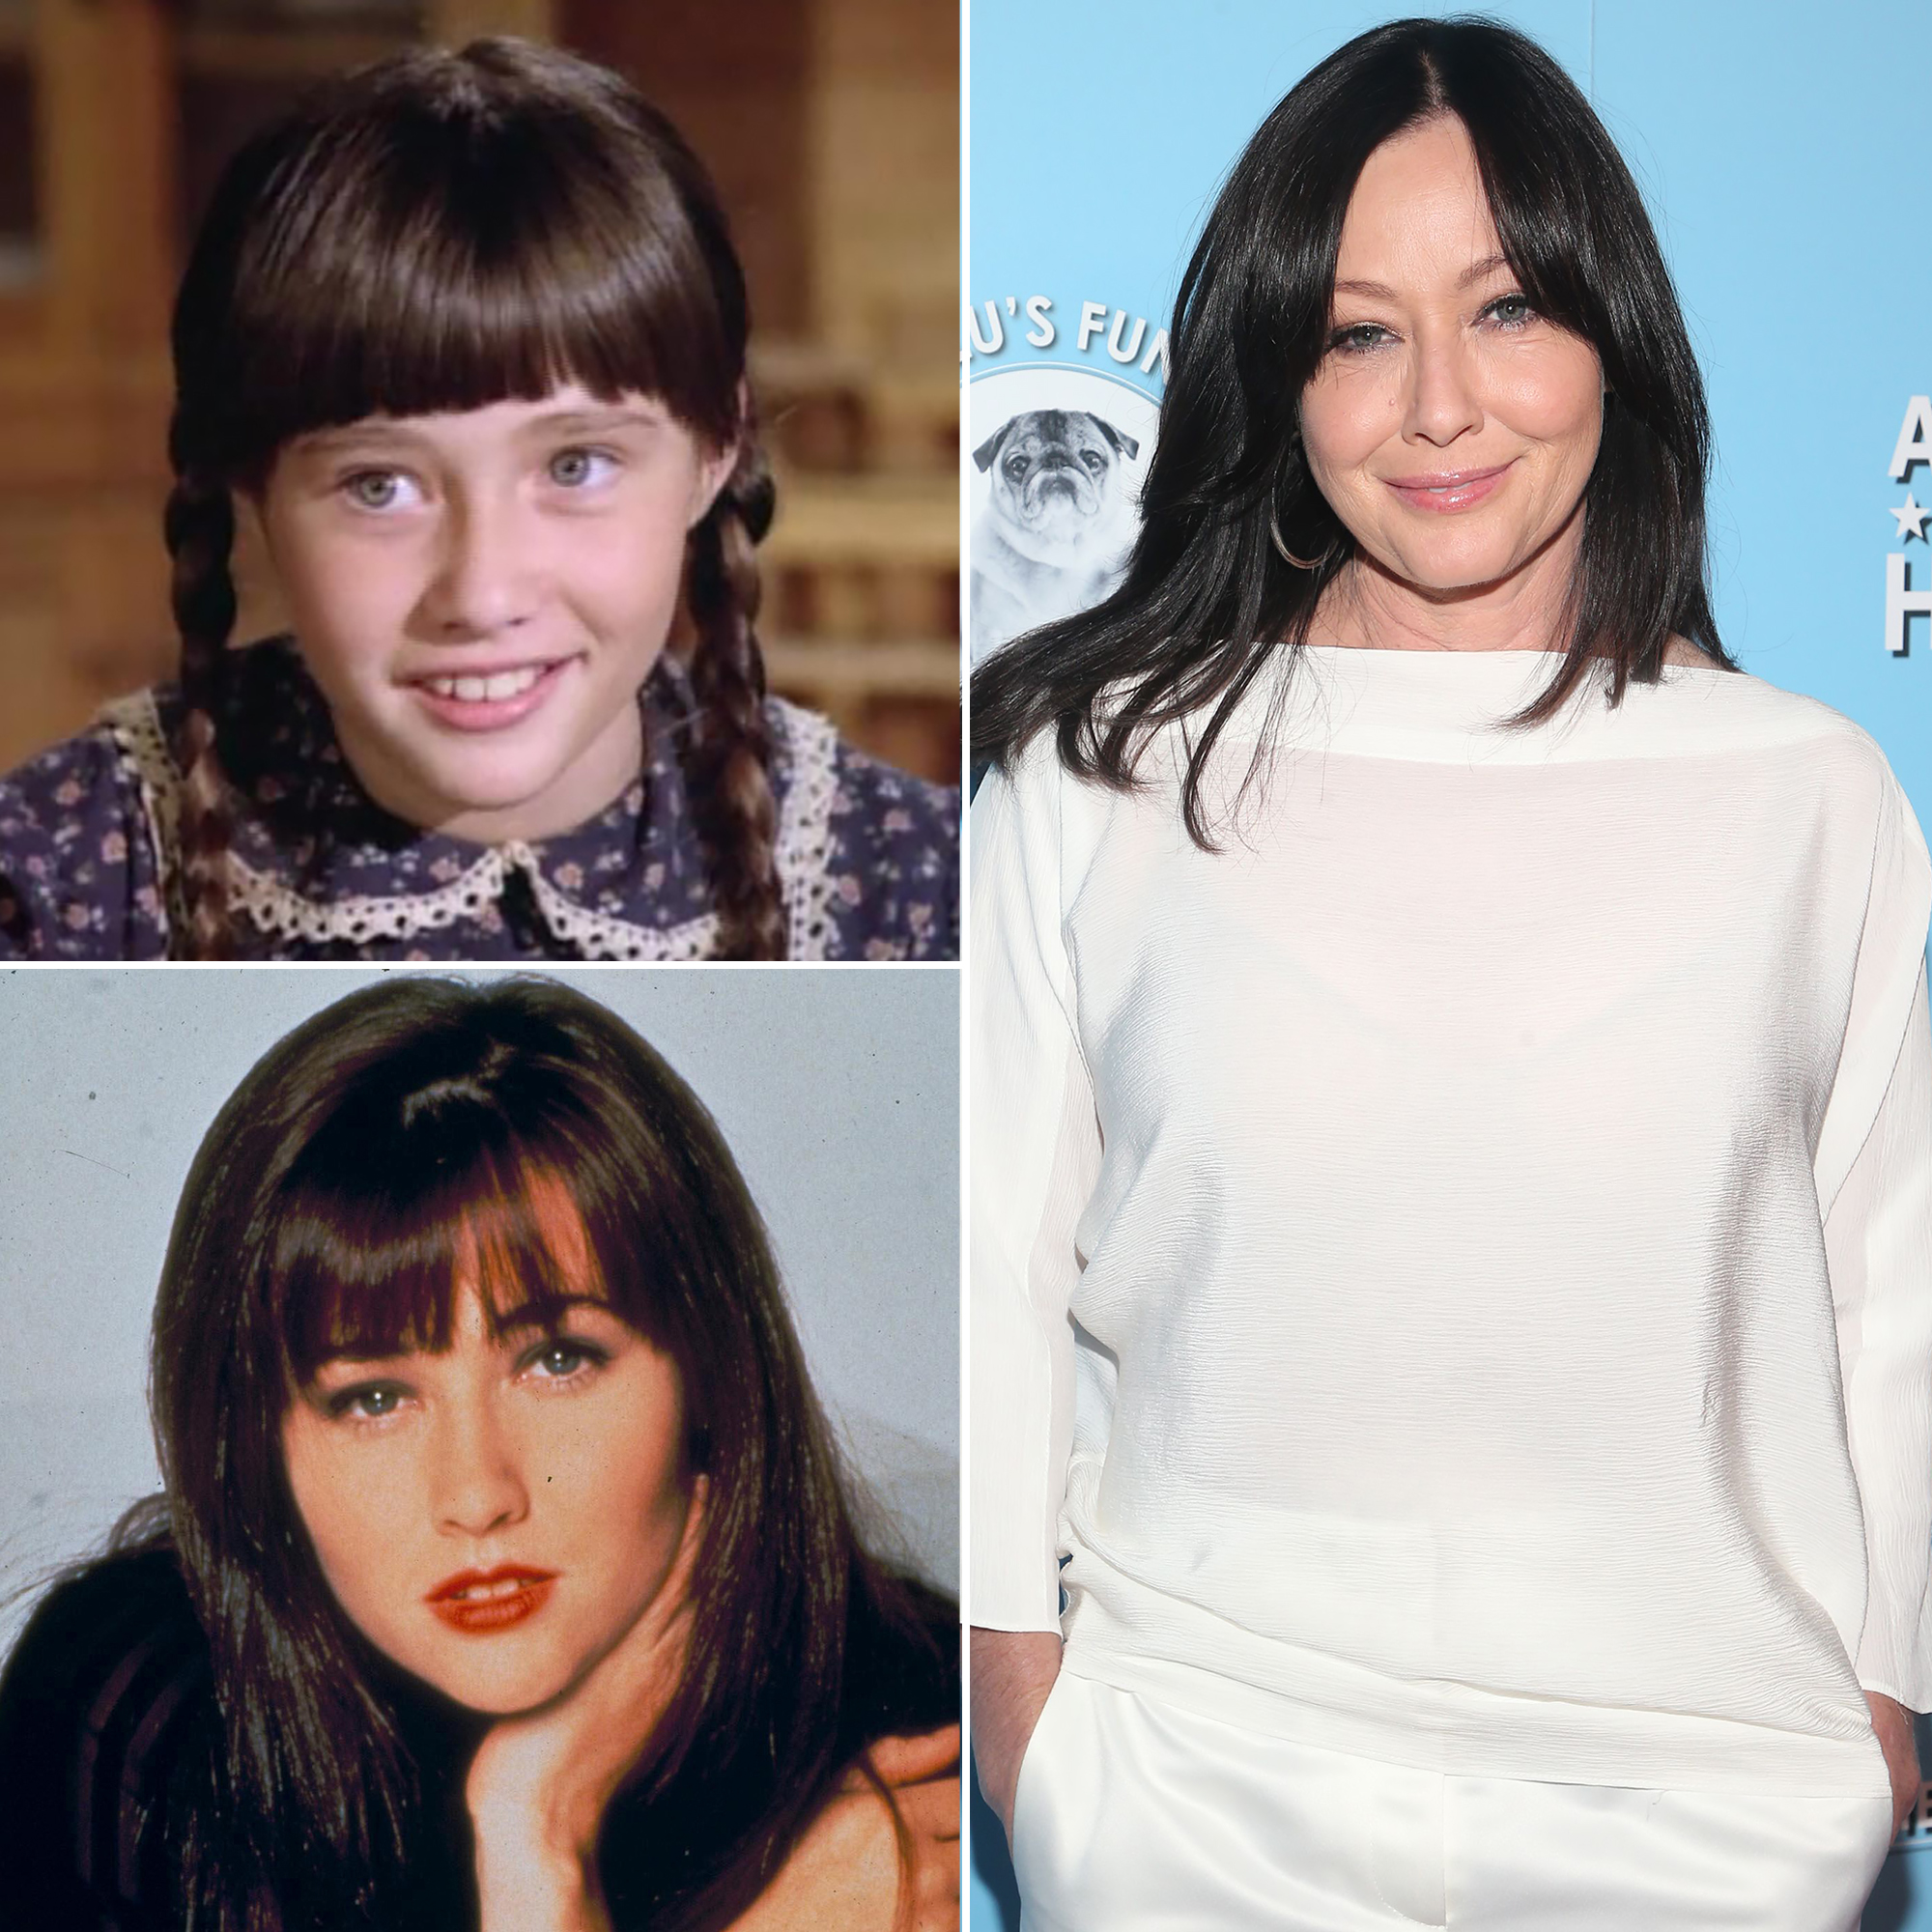 Shannen Doherty Wallpapers